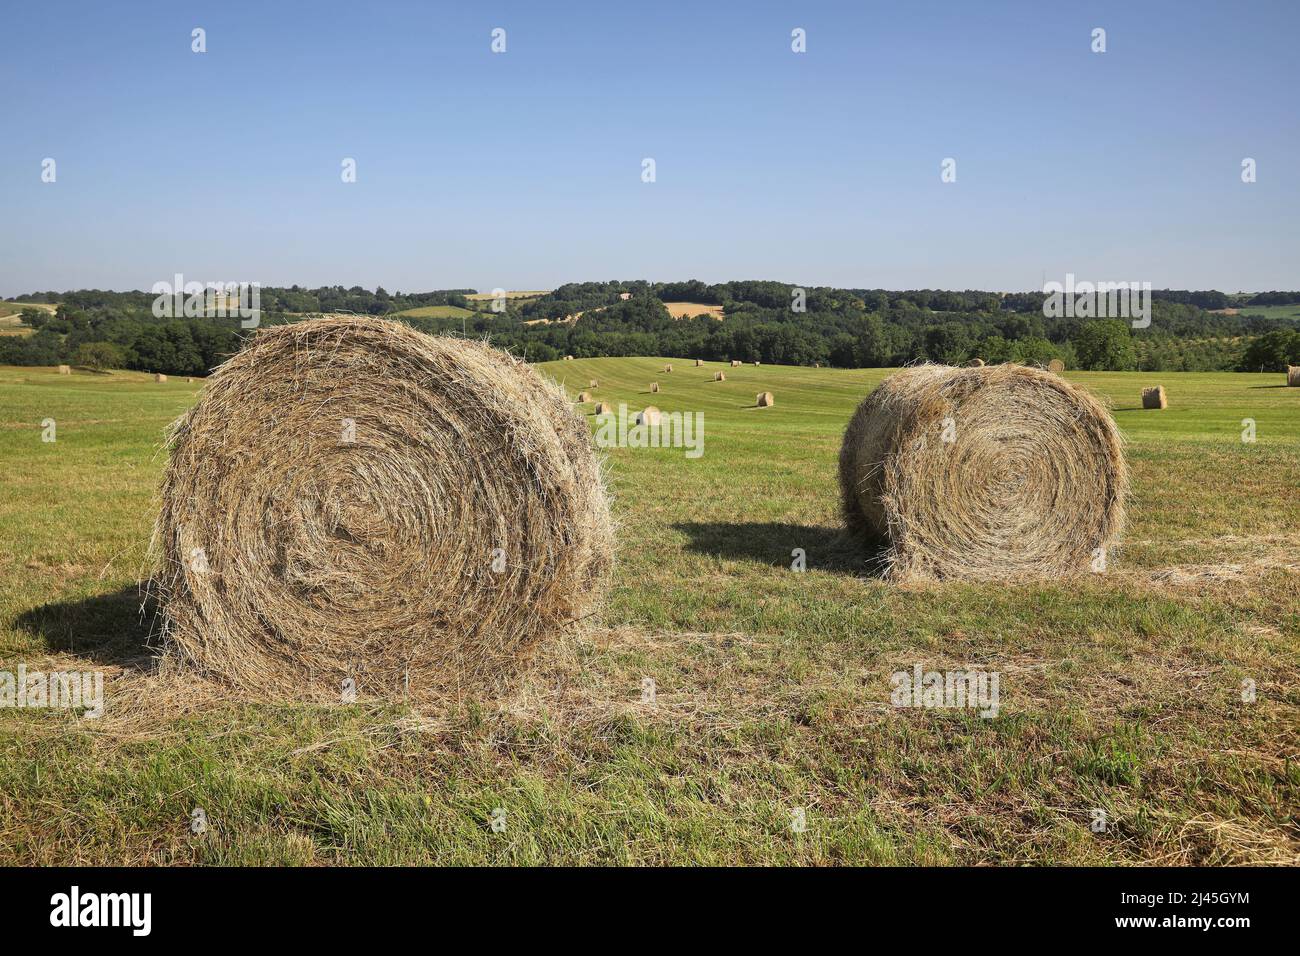 Rural, agricultural landscape in the Pays de Serre area, Quercy blanc (south-western France) Hay bales Stock Photo